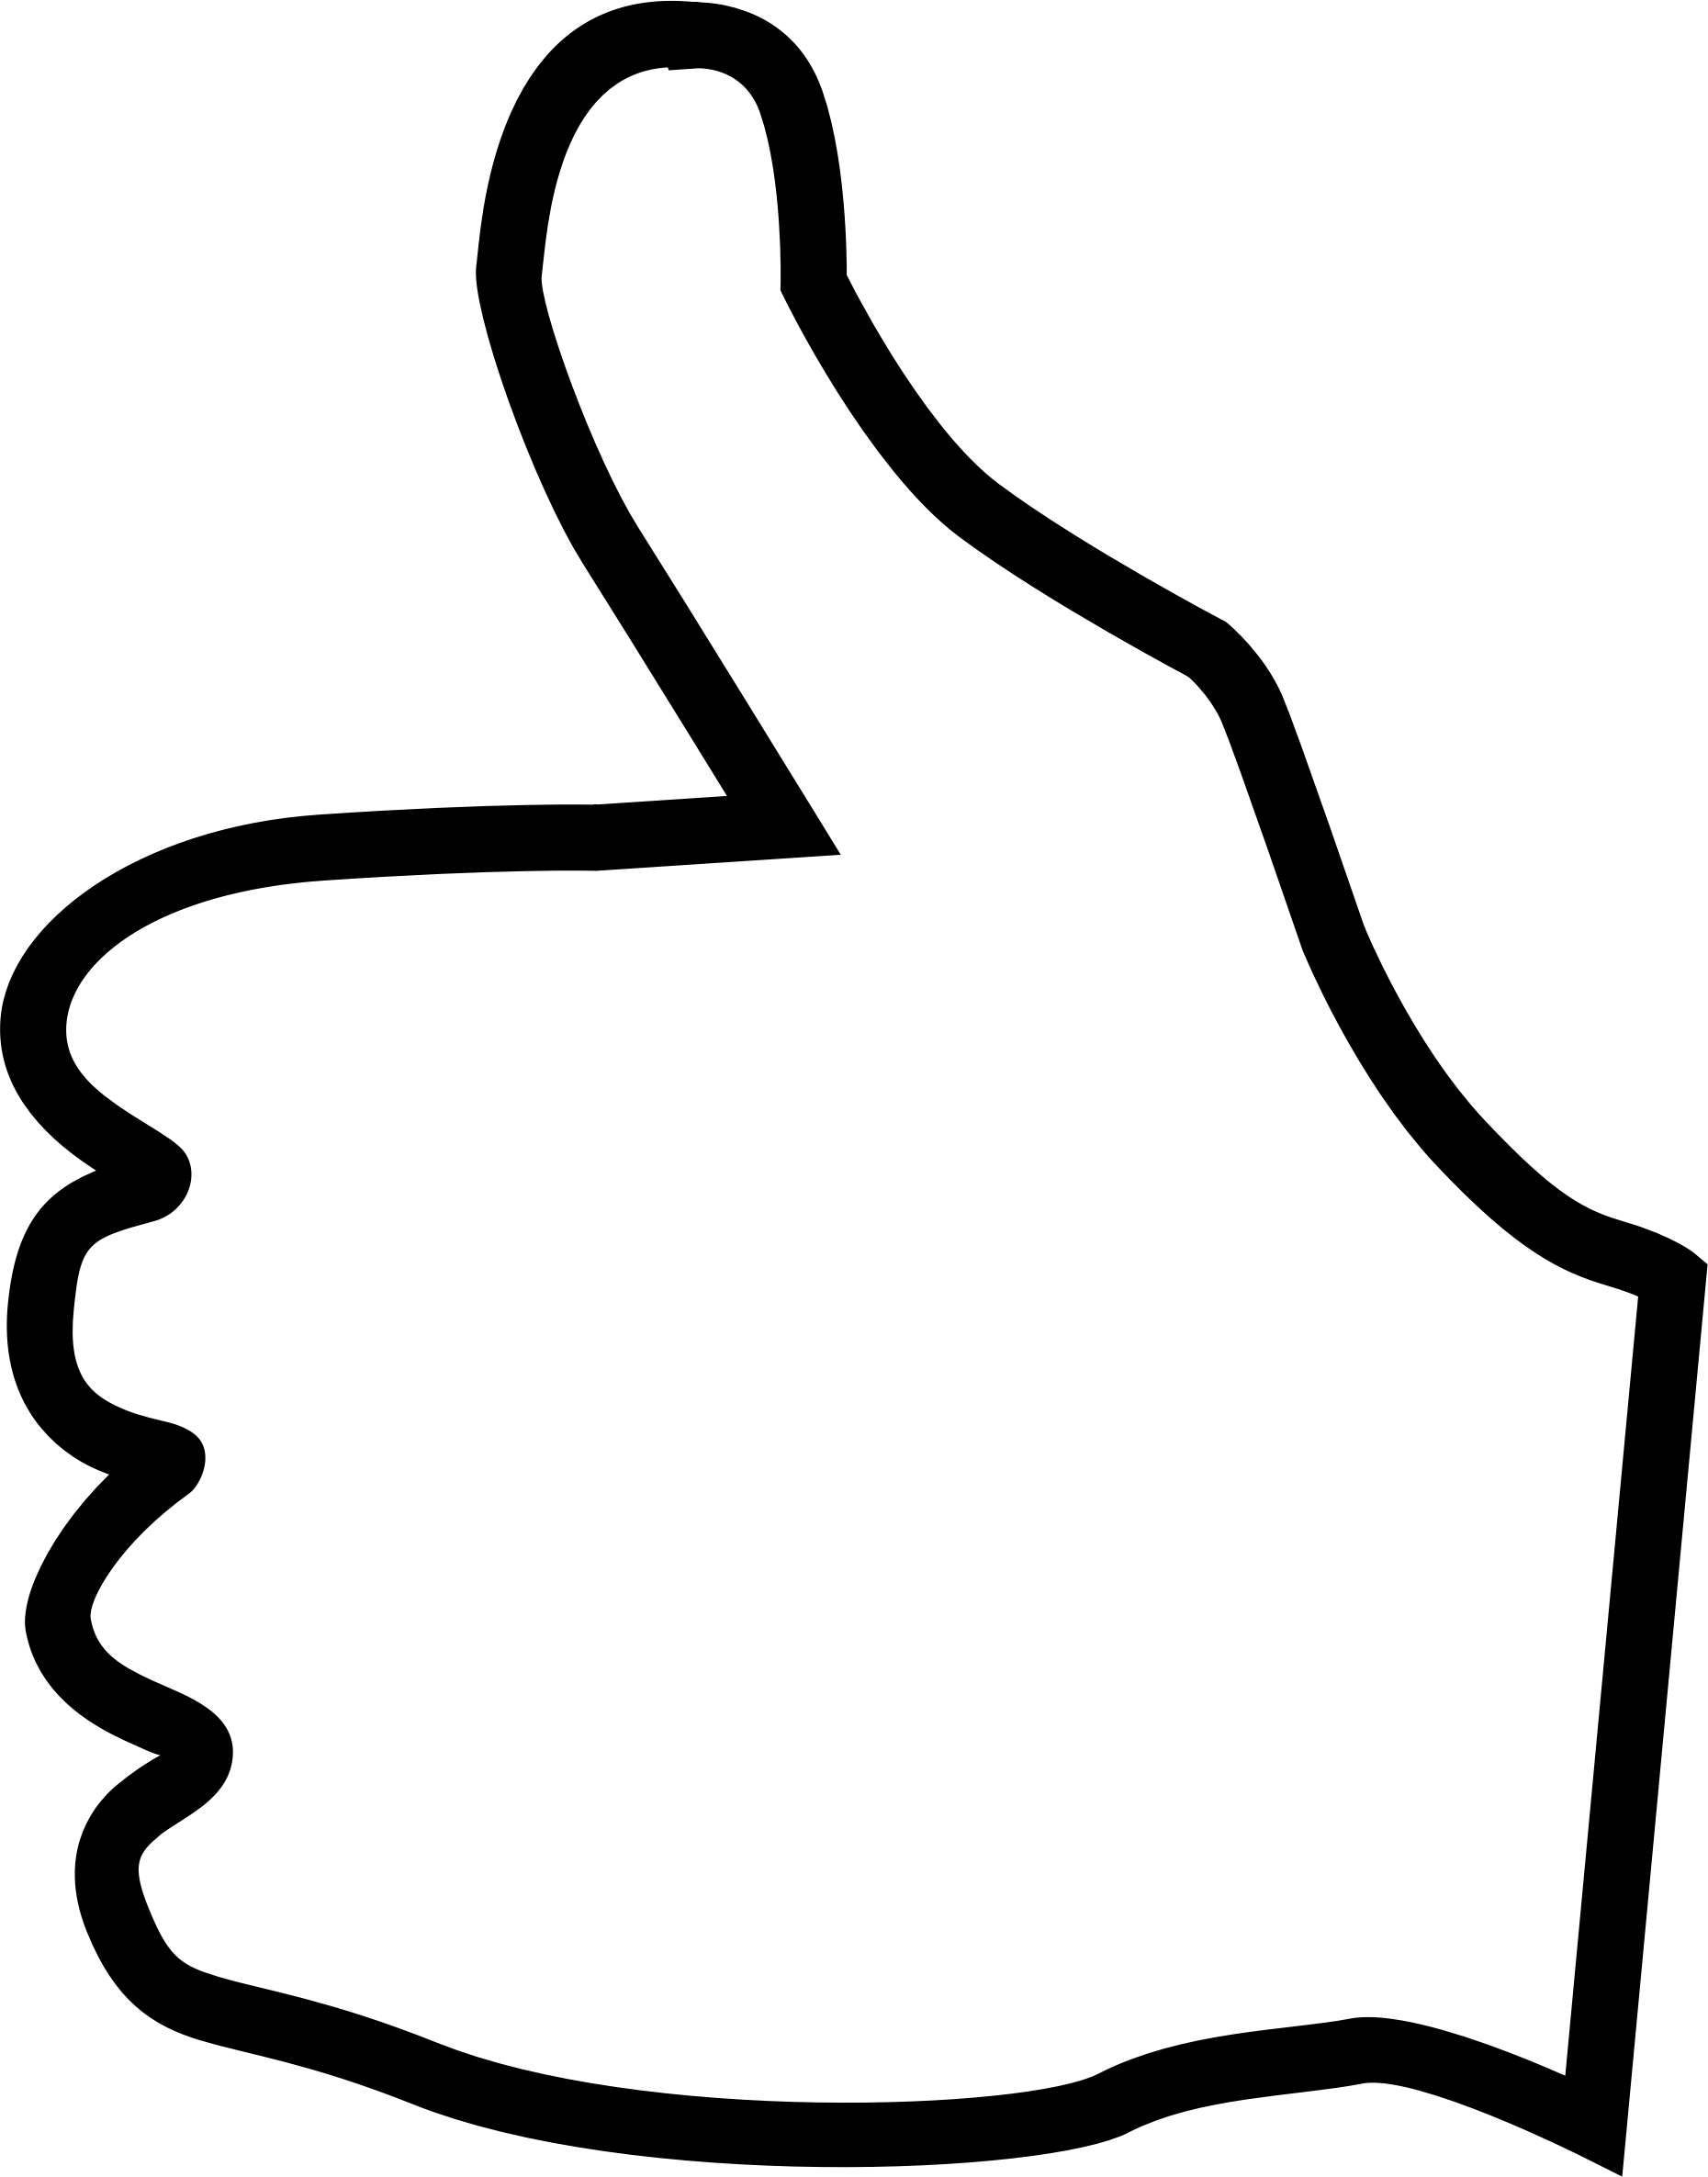 clip art pictures of thumbs up - photo #45